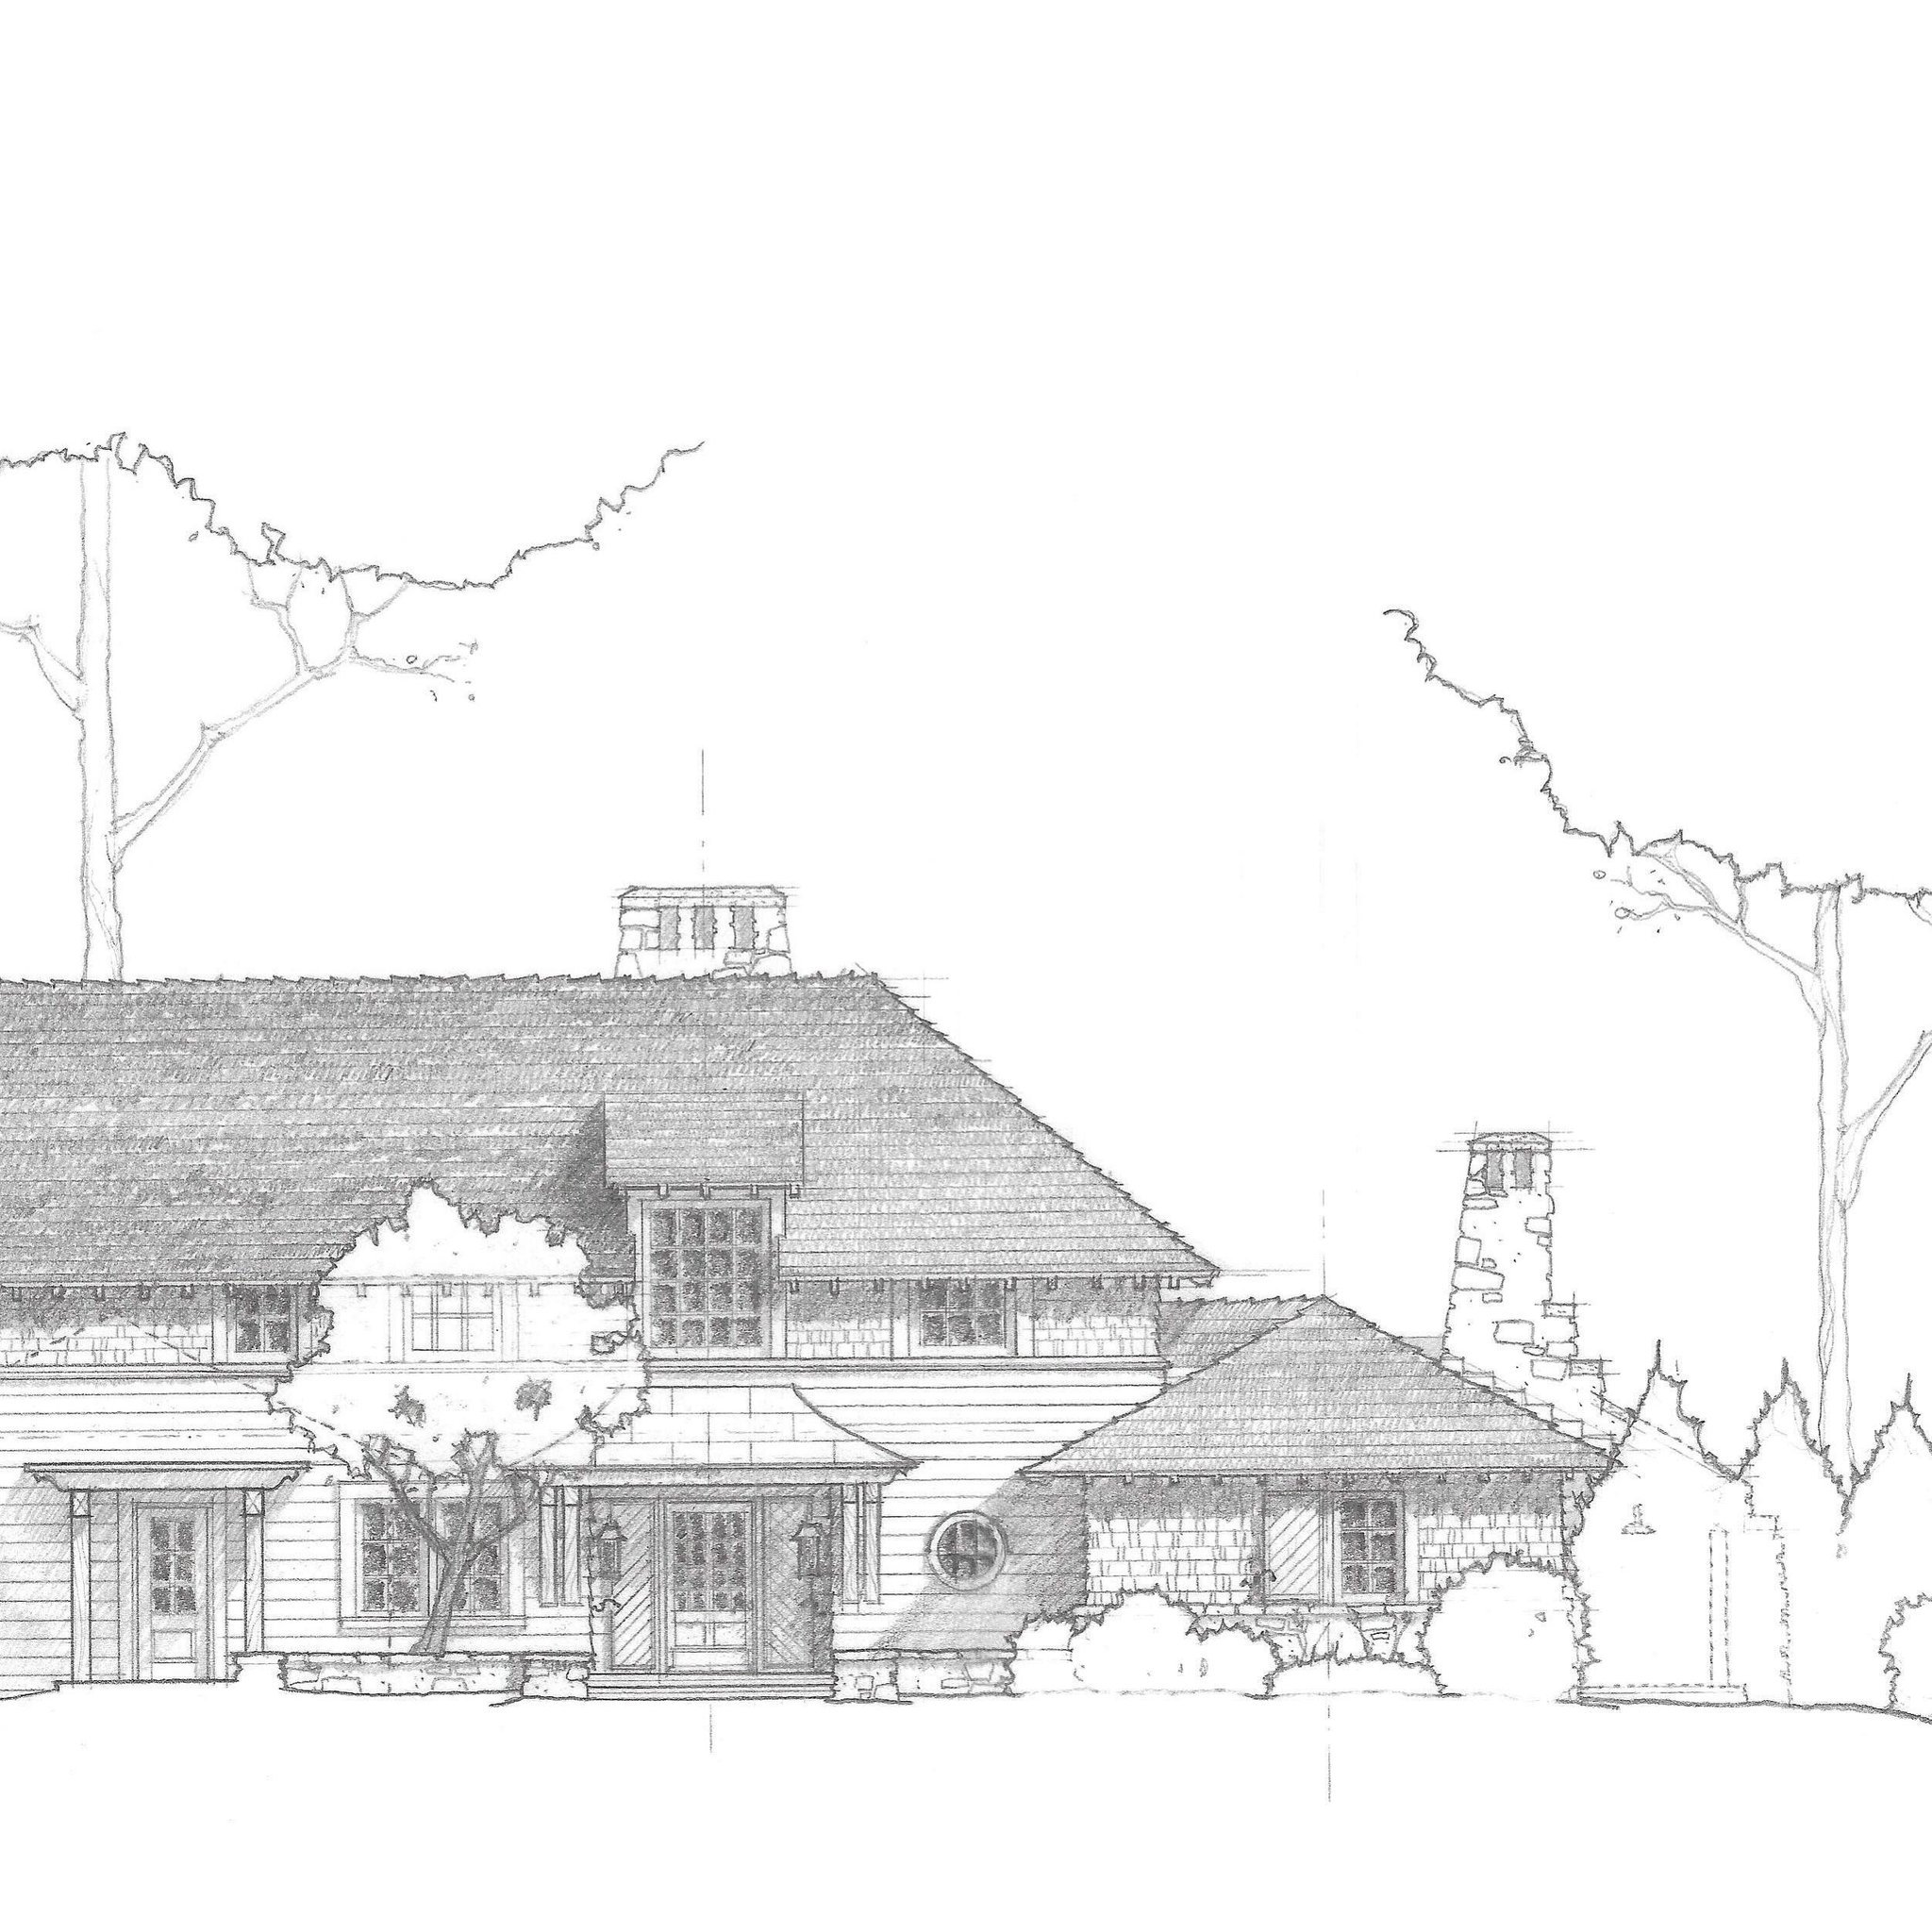 On the boards at Lake Martin.  Preliminary sketch of the parking court elevation. 
.
.
.
#architecture #lakehouse #handdrawn #drawing #pencilsketch #lakemartin #residentialdesign #home #familyhome #traditionaldesign #woodroof #carlislemoorearchitects